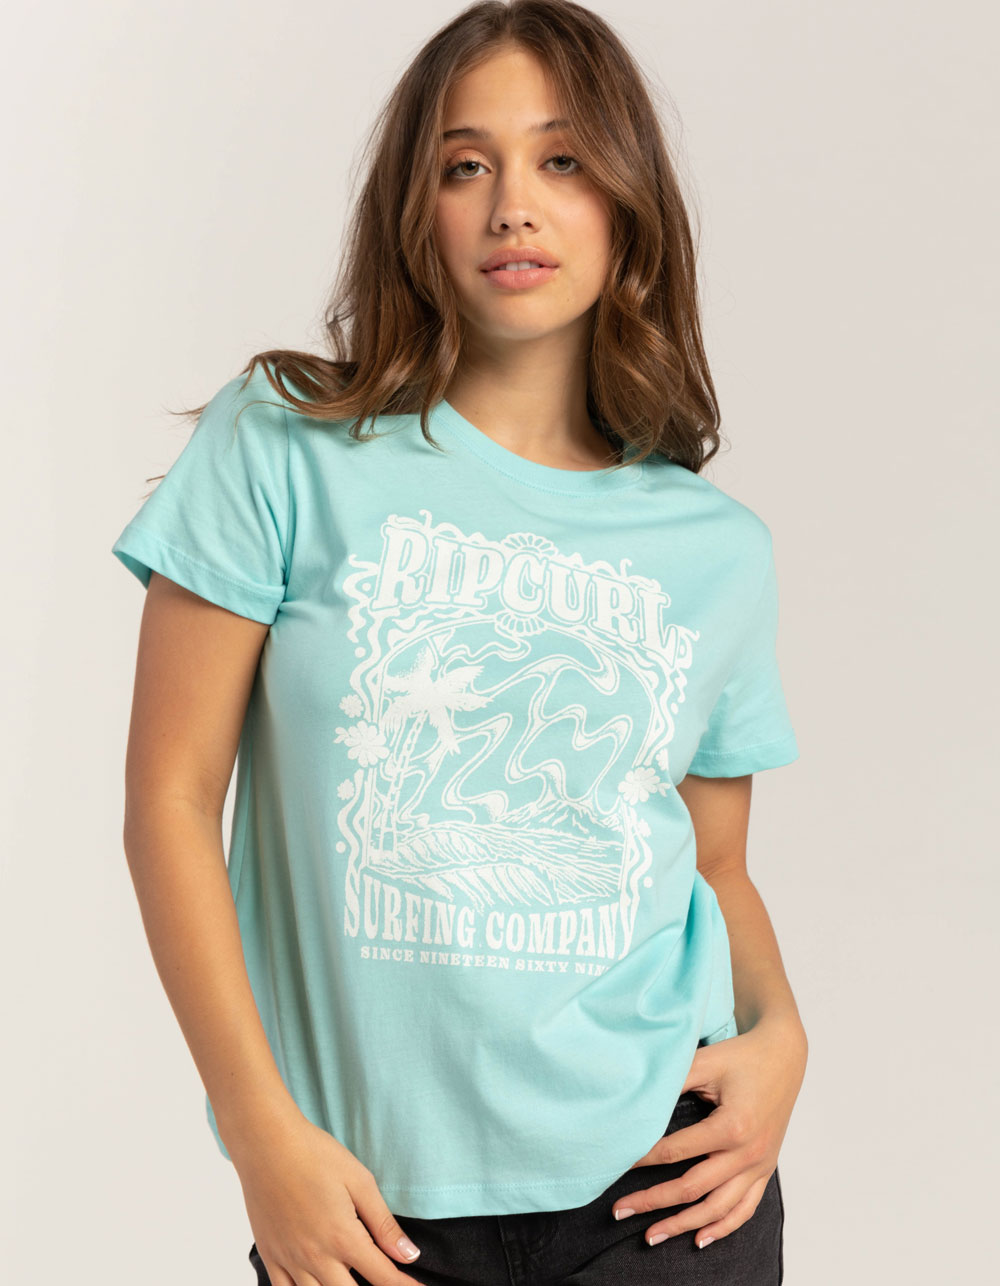  AKSODJF Graphic Tees for Women Ladies,40 cent items